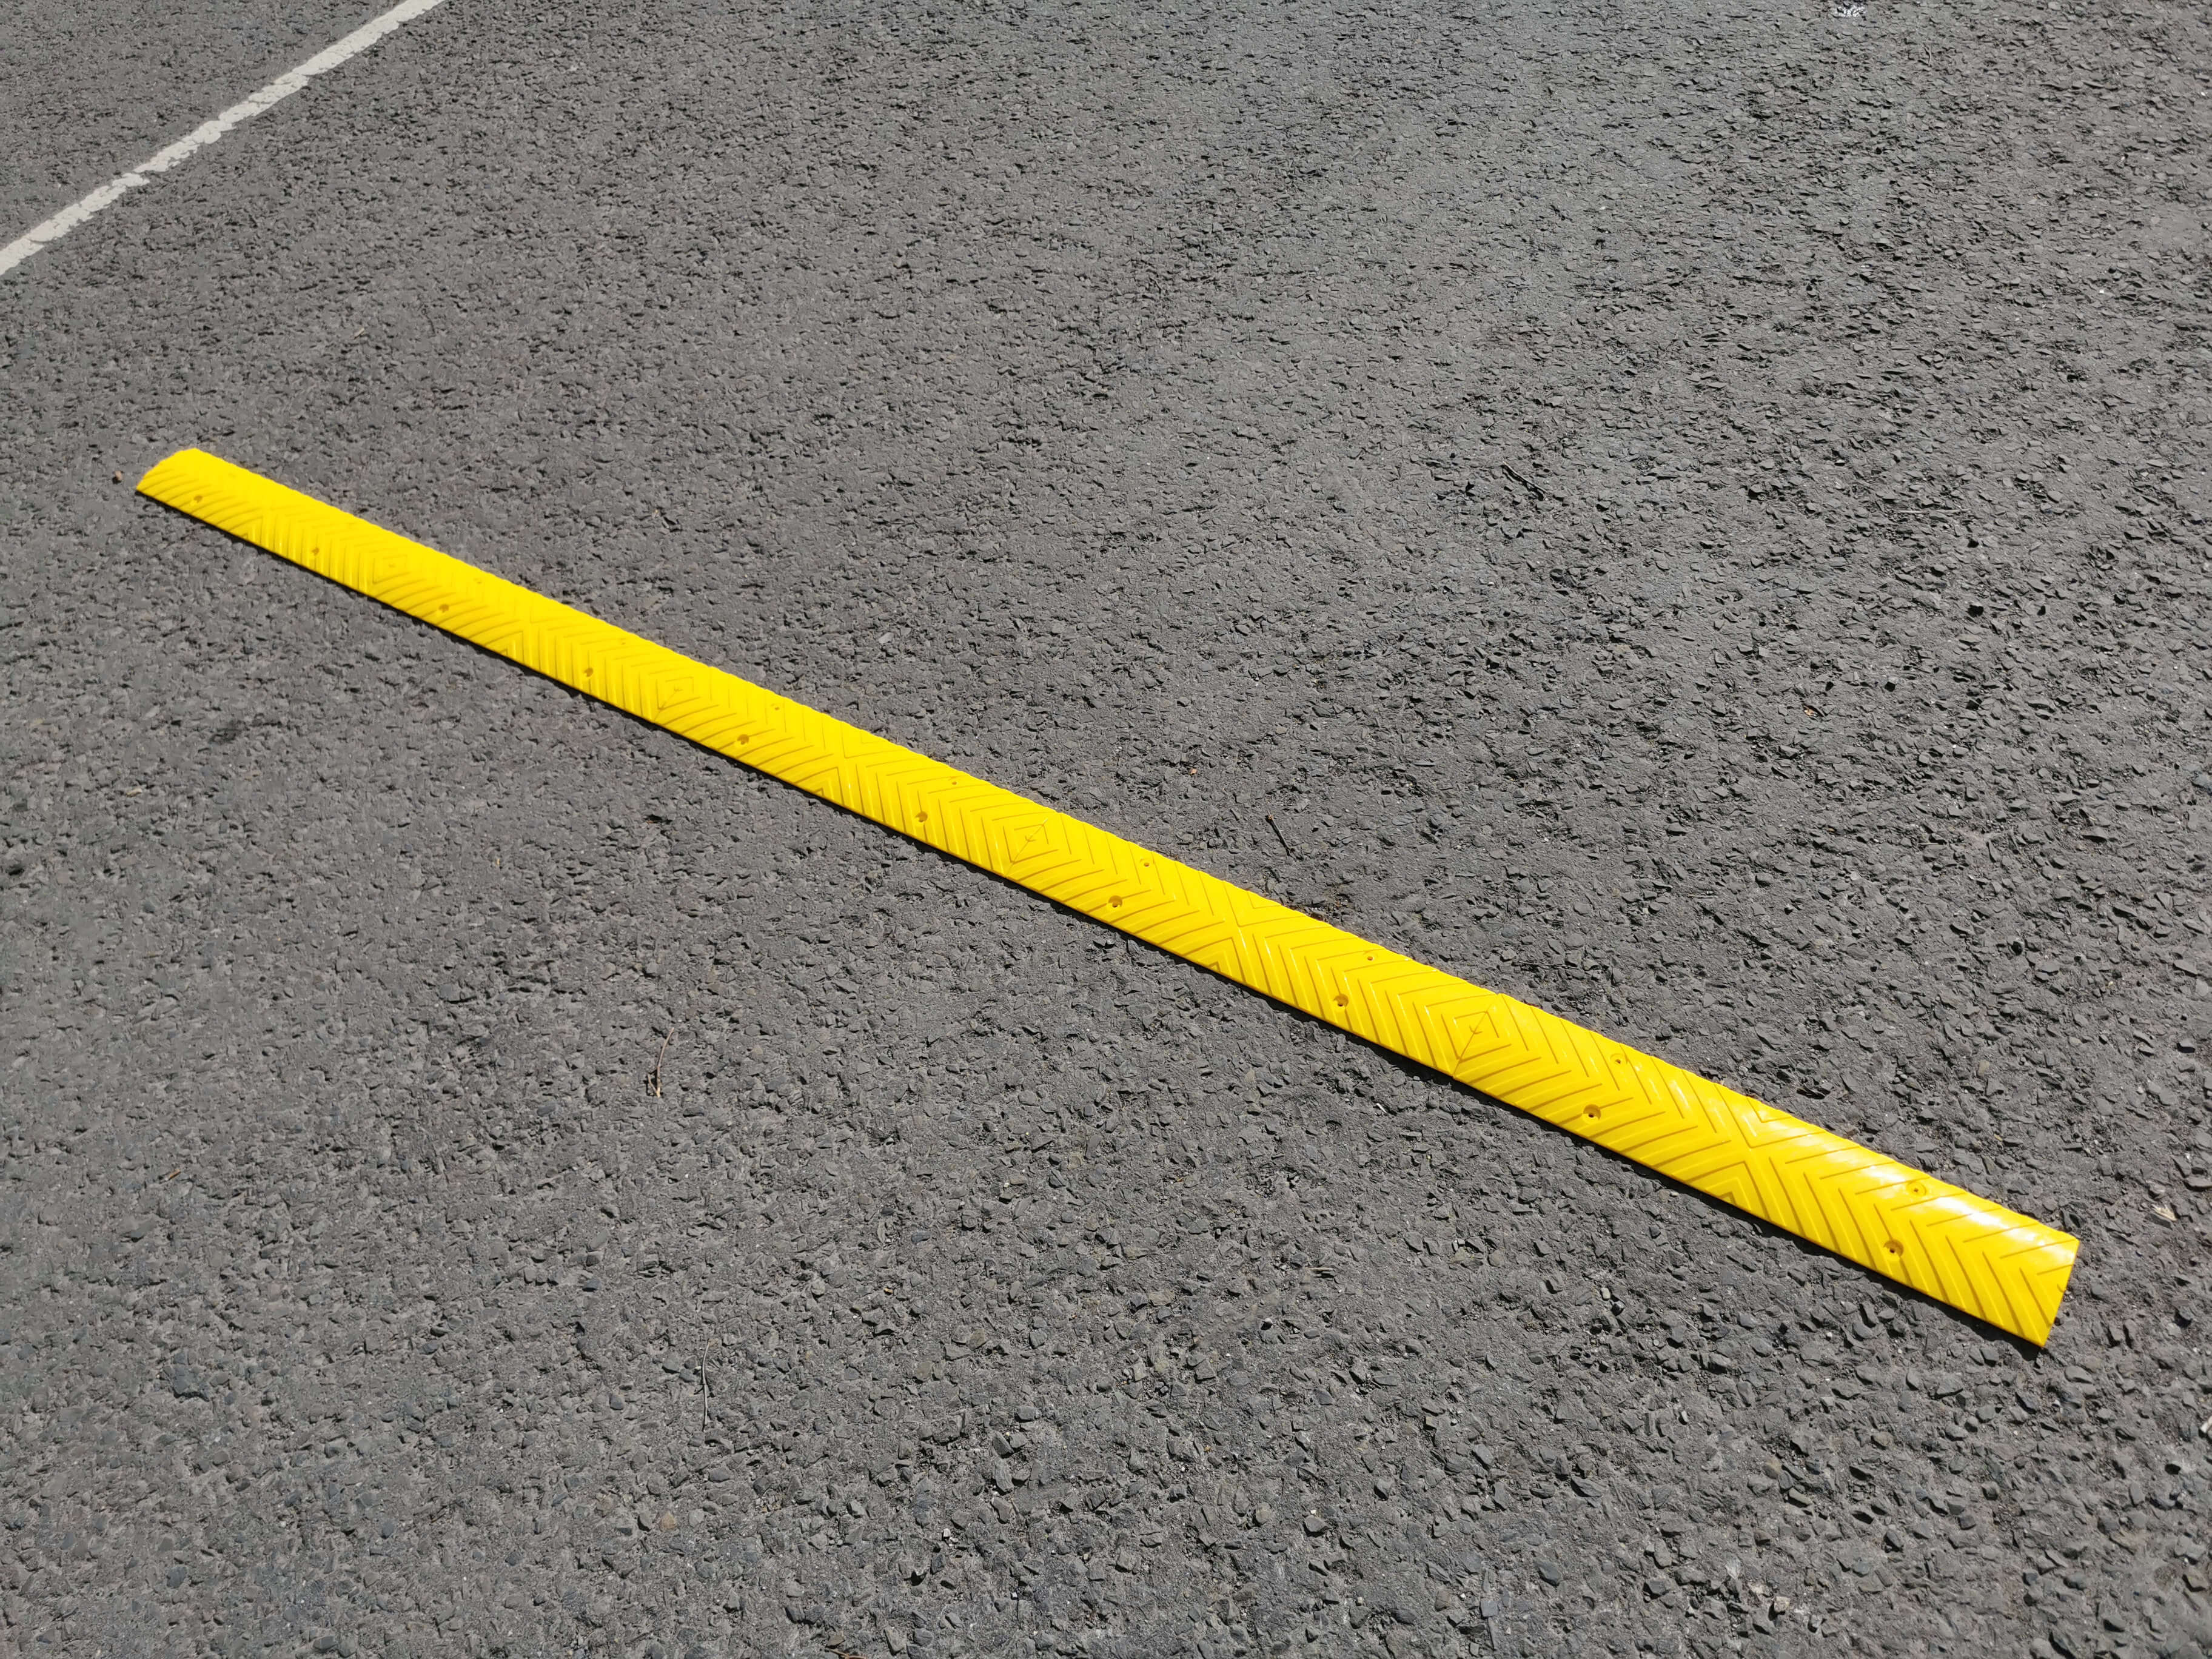 Plastic Safety Rumble Strip Yellow